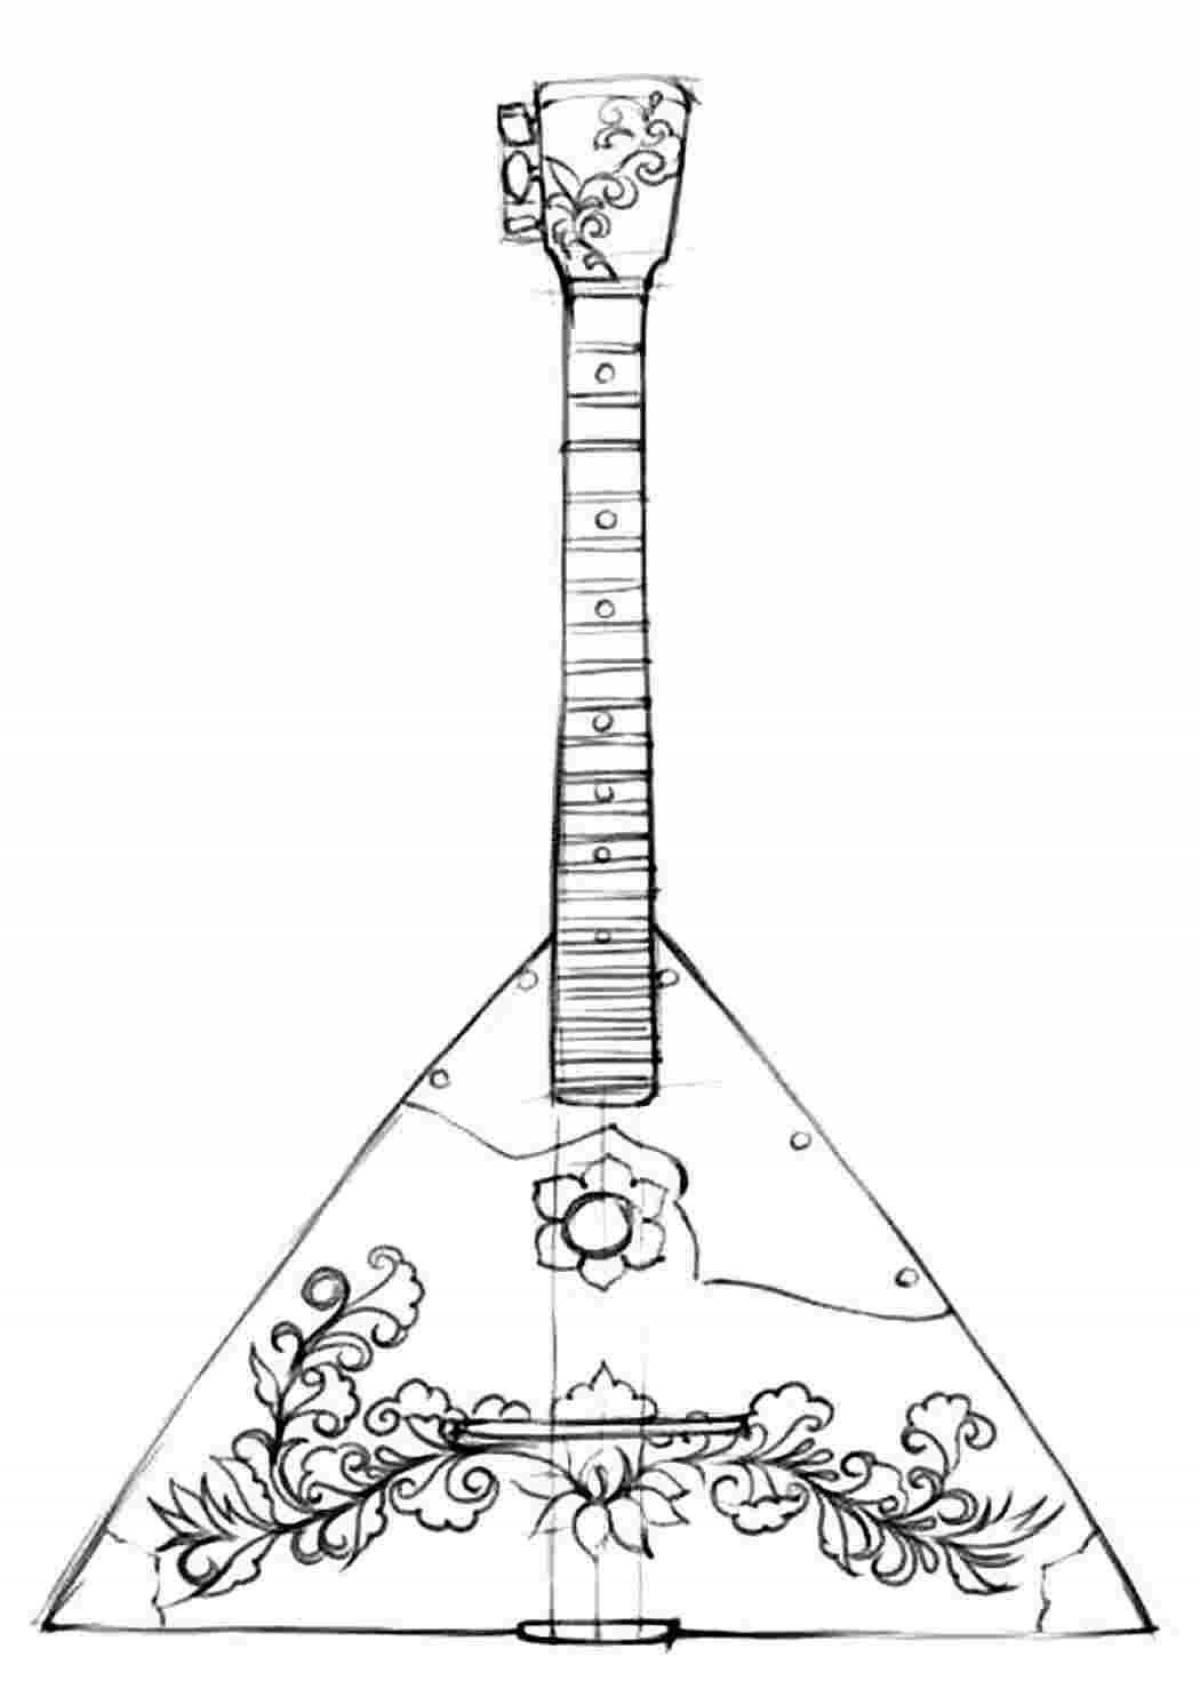 Magic folk musical instruments coloring pages for kids